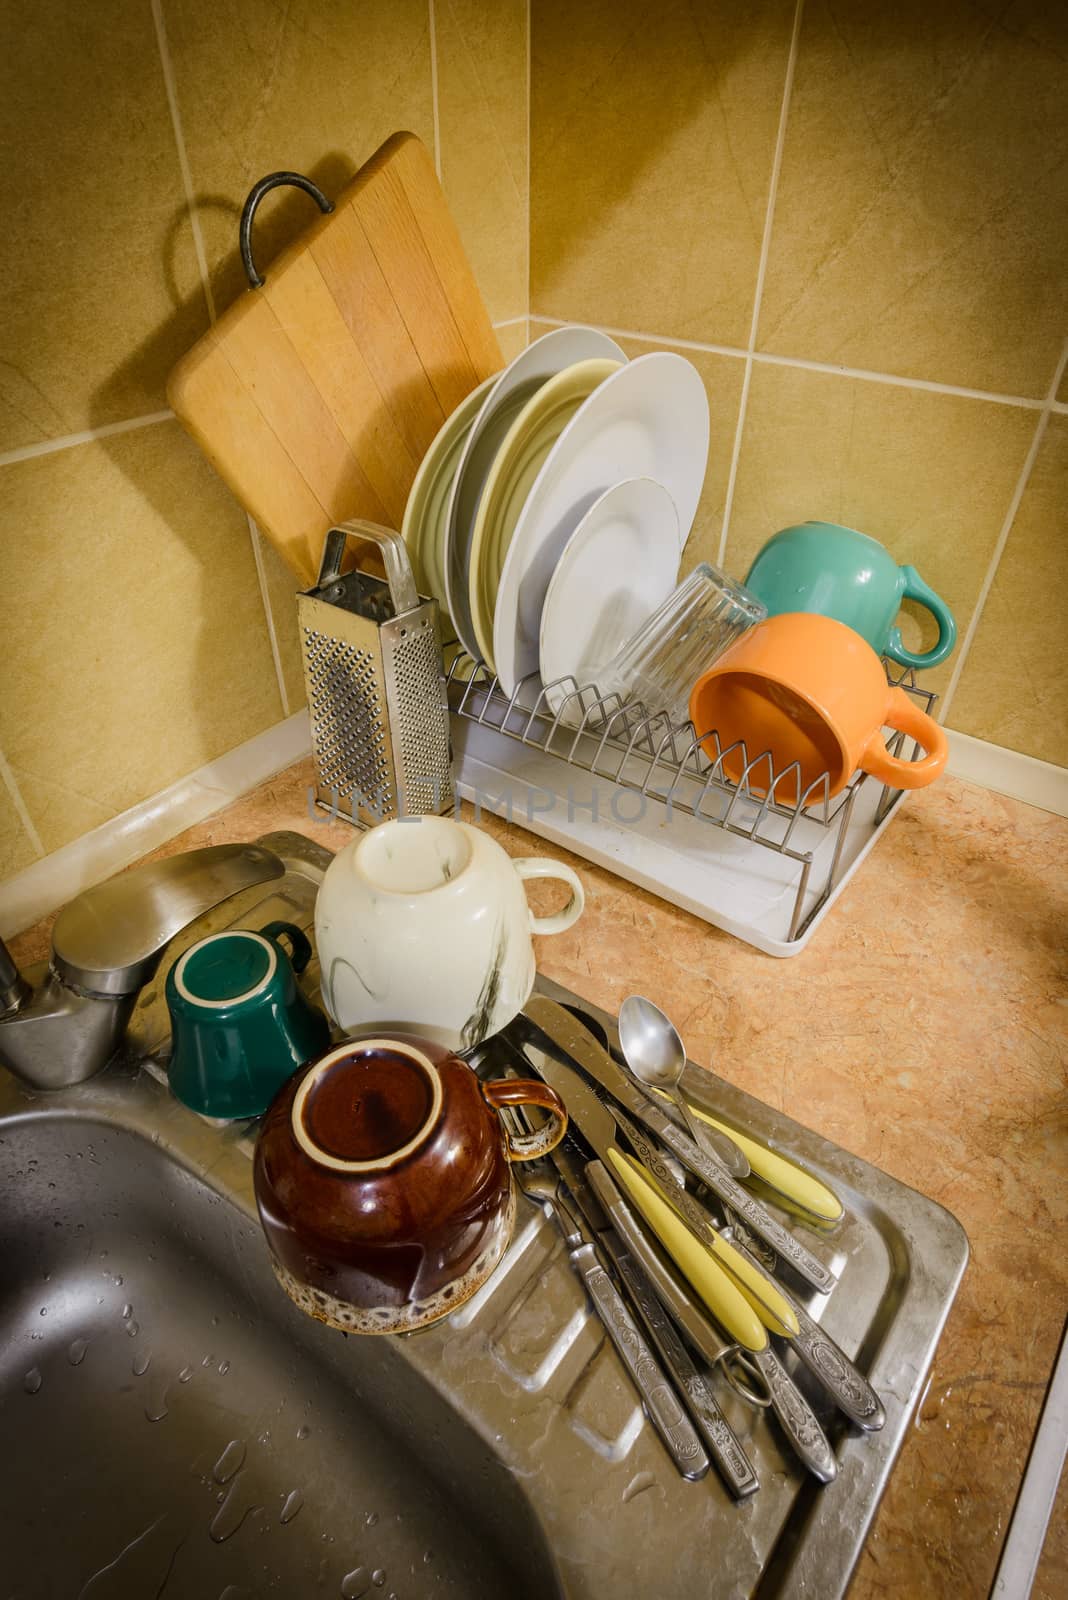 Dishes and Tableware Drying in Kitchen by MaxalTamor